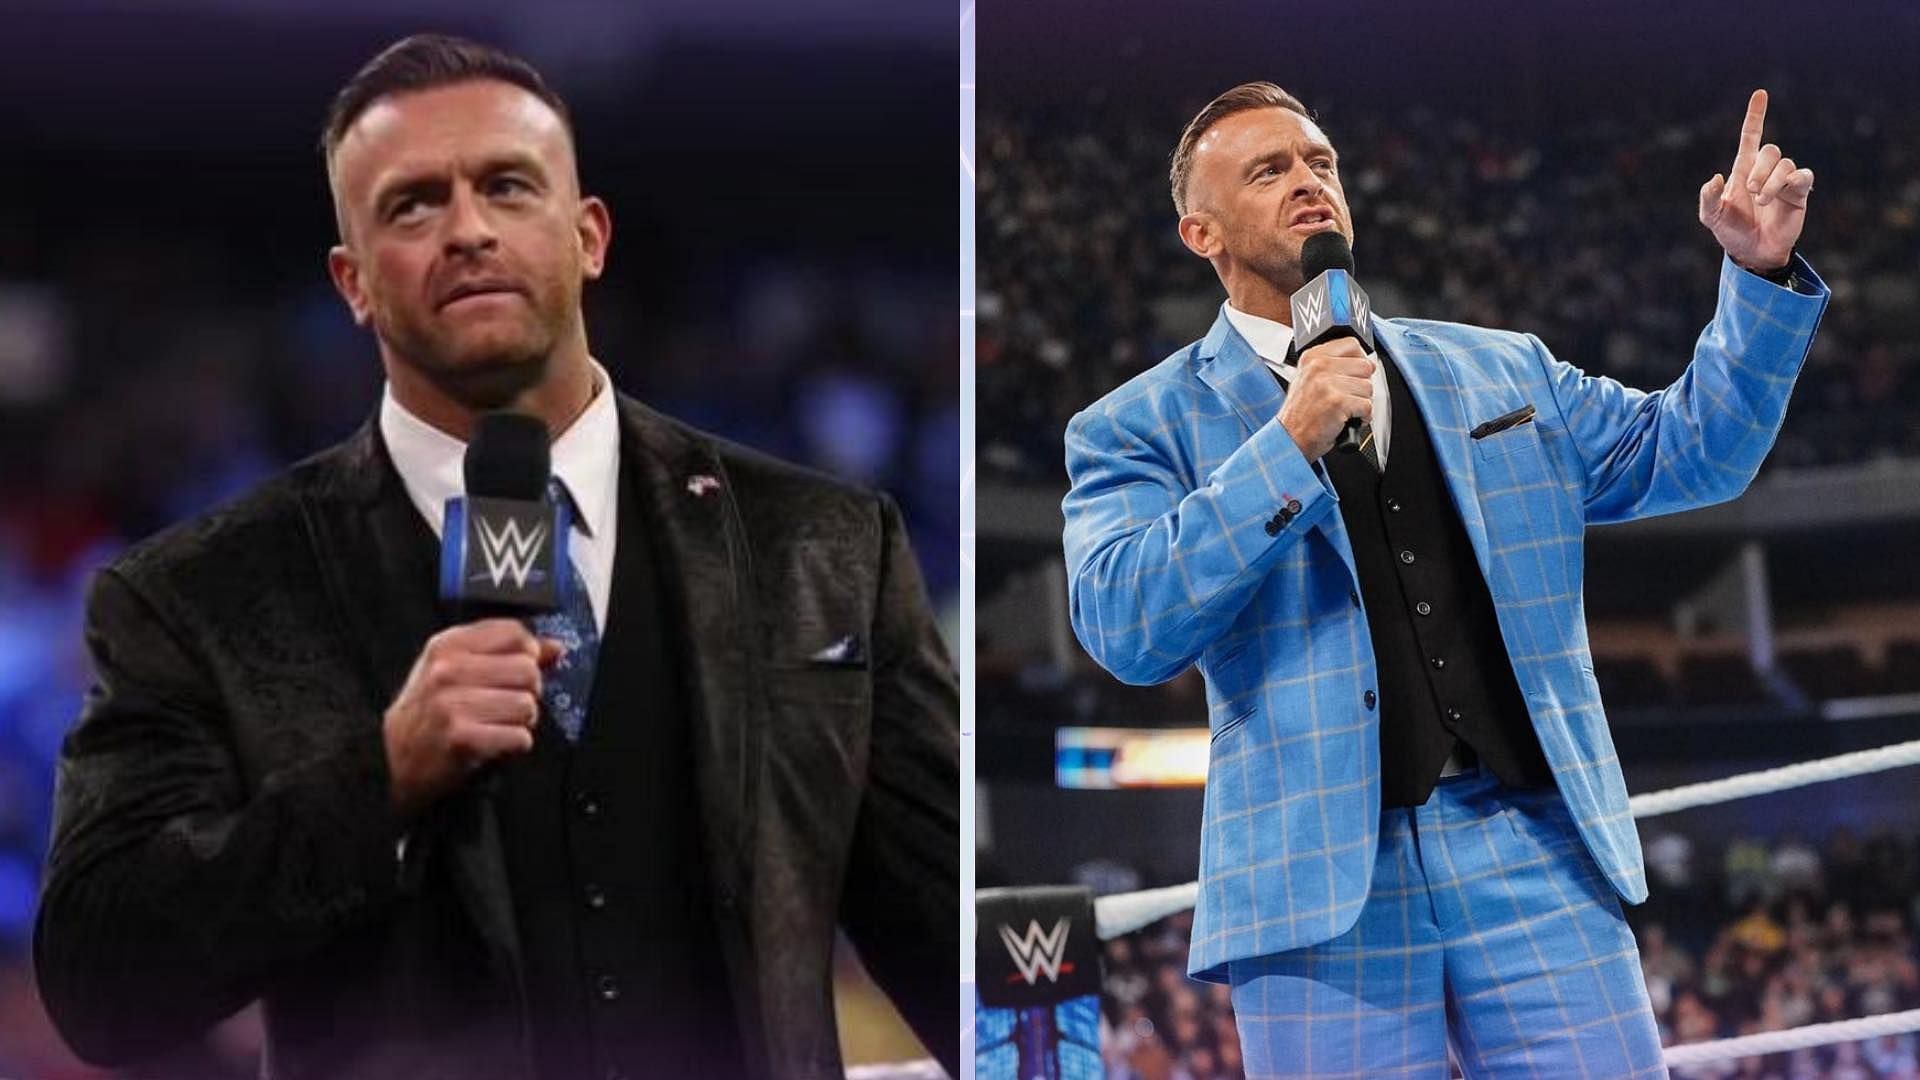 38yearold star to set up huge feud with Nick Aldis on WWE SmackDown